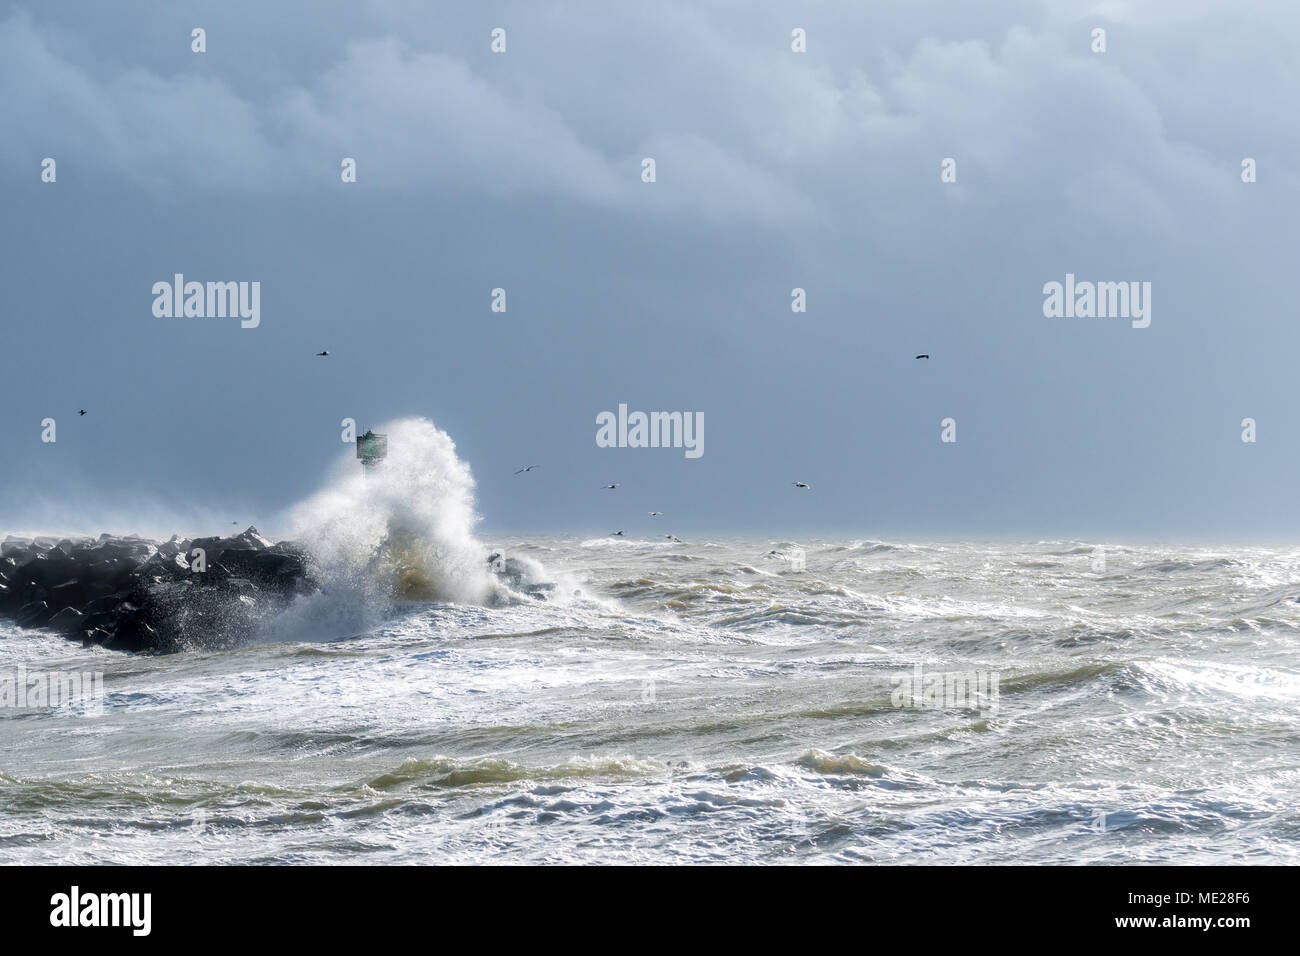 Mole with spray in strong winds and waves, North Sea, Hvide Sande, Syddanmark, Denmark Stock Photo